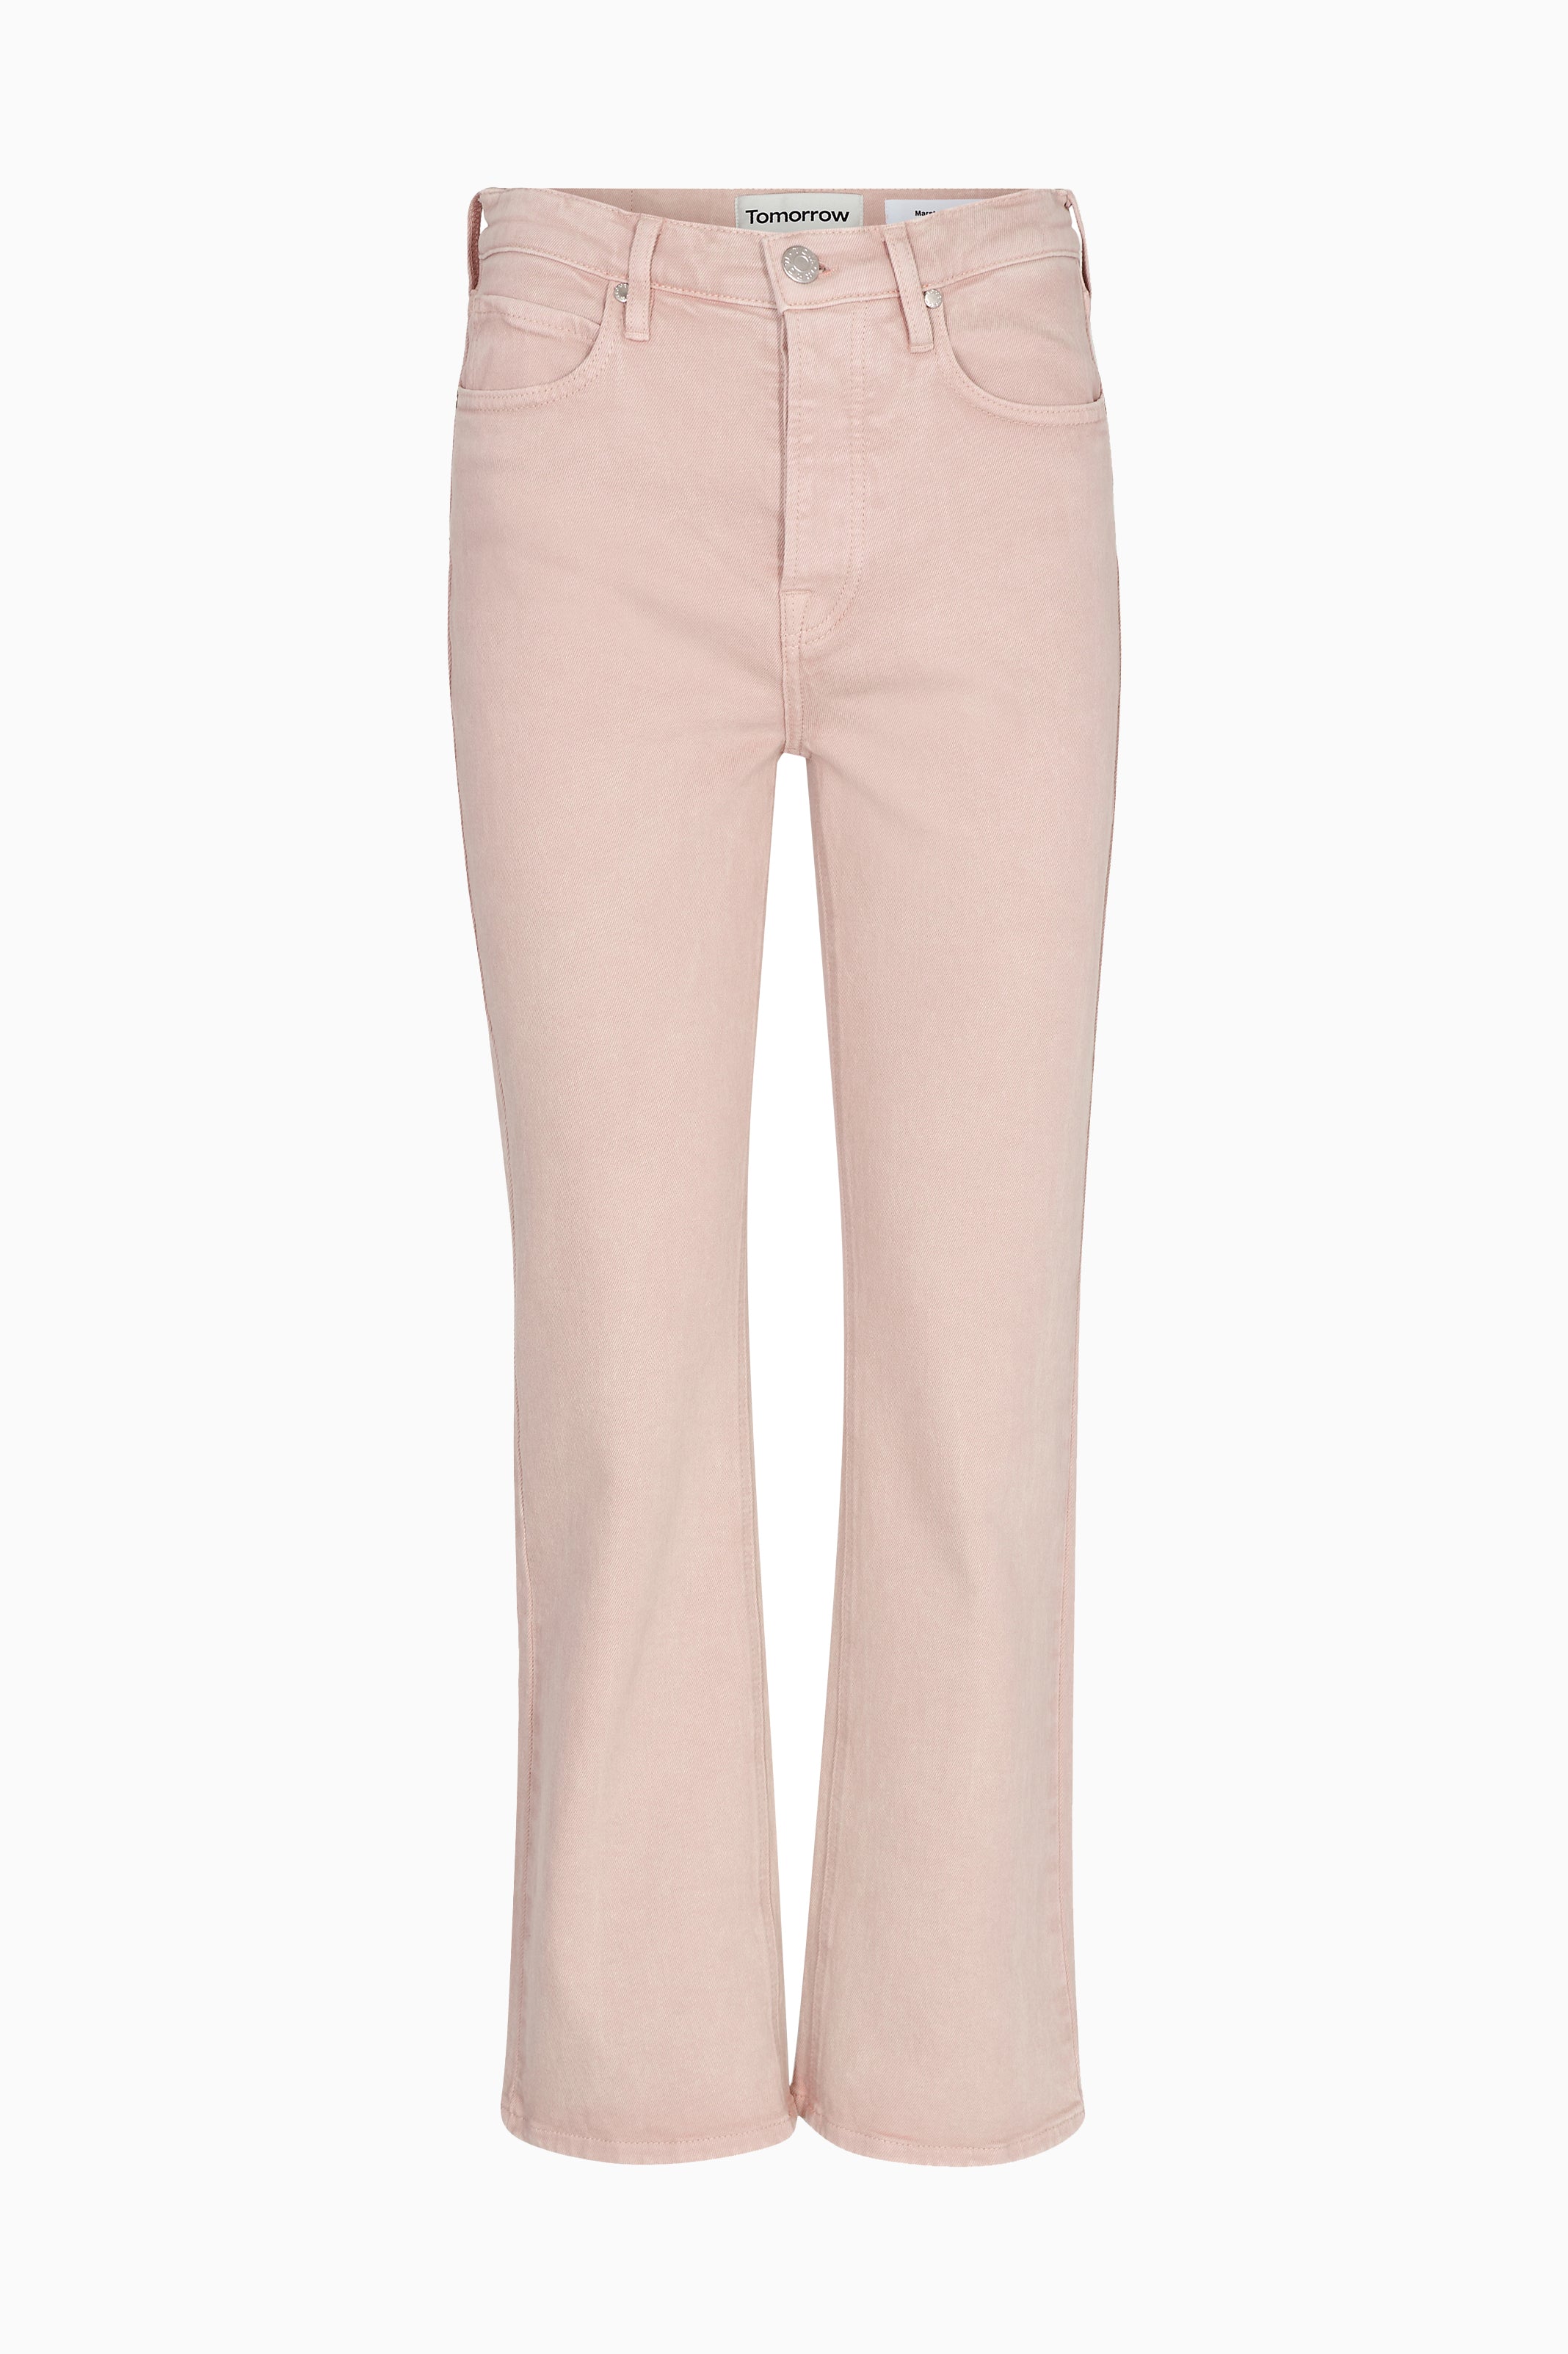 Tomorrow TD Marston Jeans Heritage Dyed Jeans & Pants 306 Pale Rose